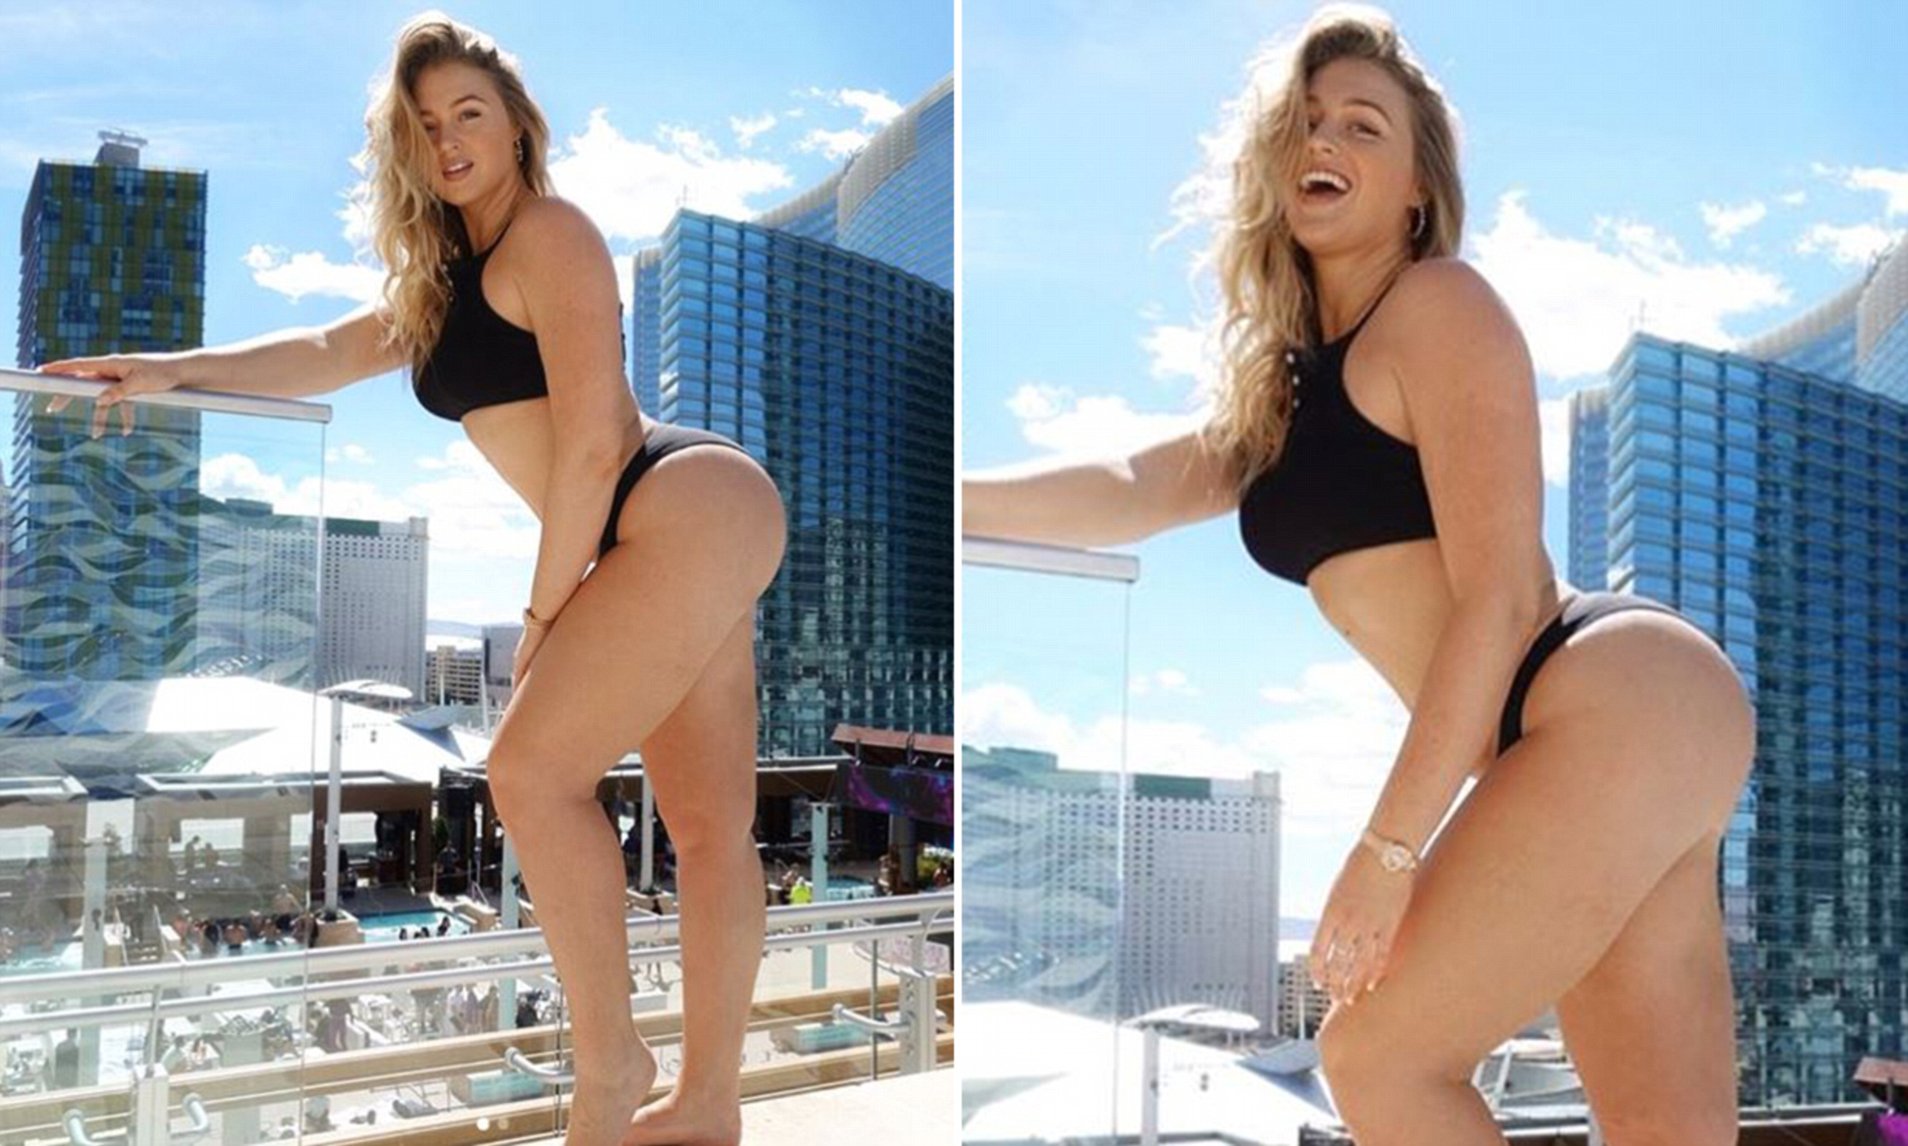 Iskra Lawrence shows off her booty in saucy bikini shots | Daily Mail Online